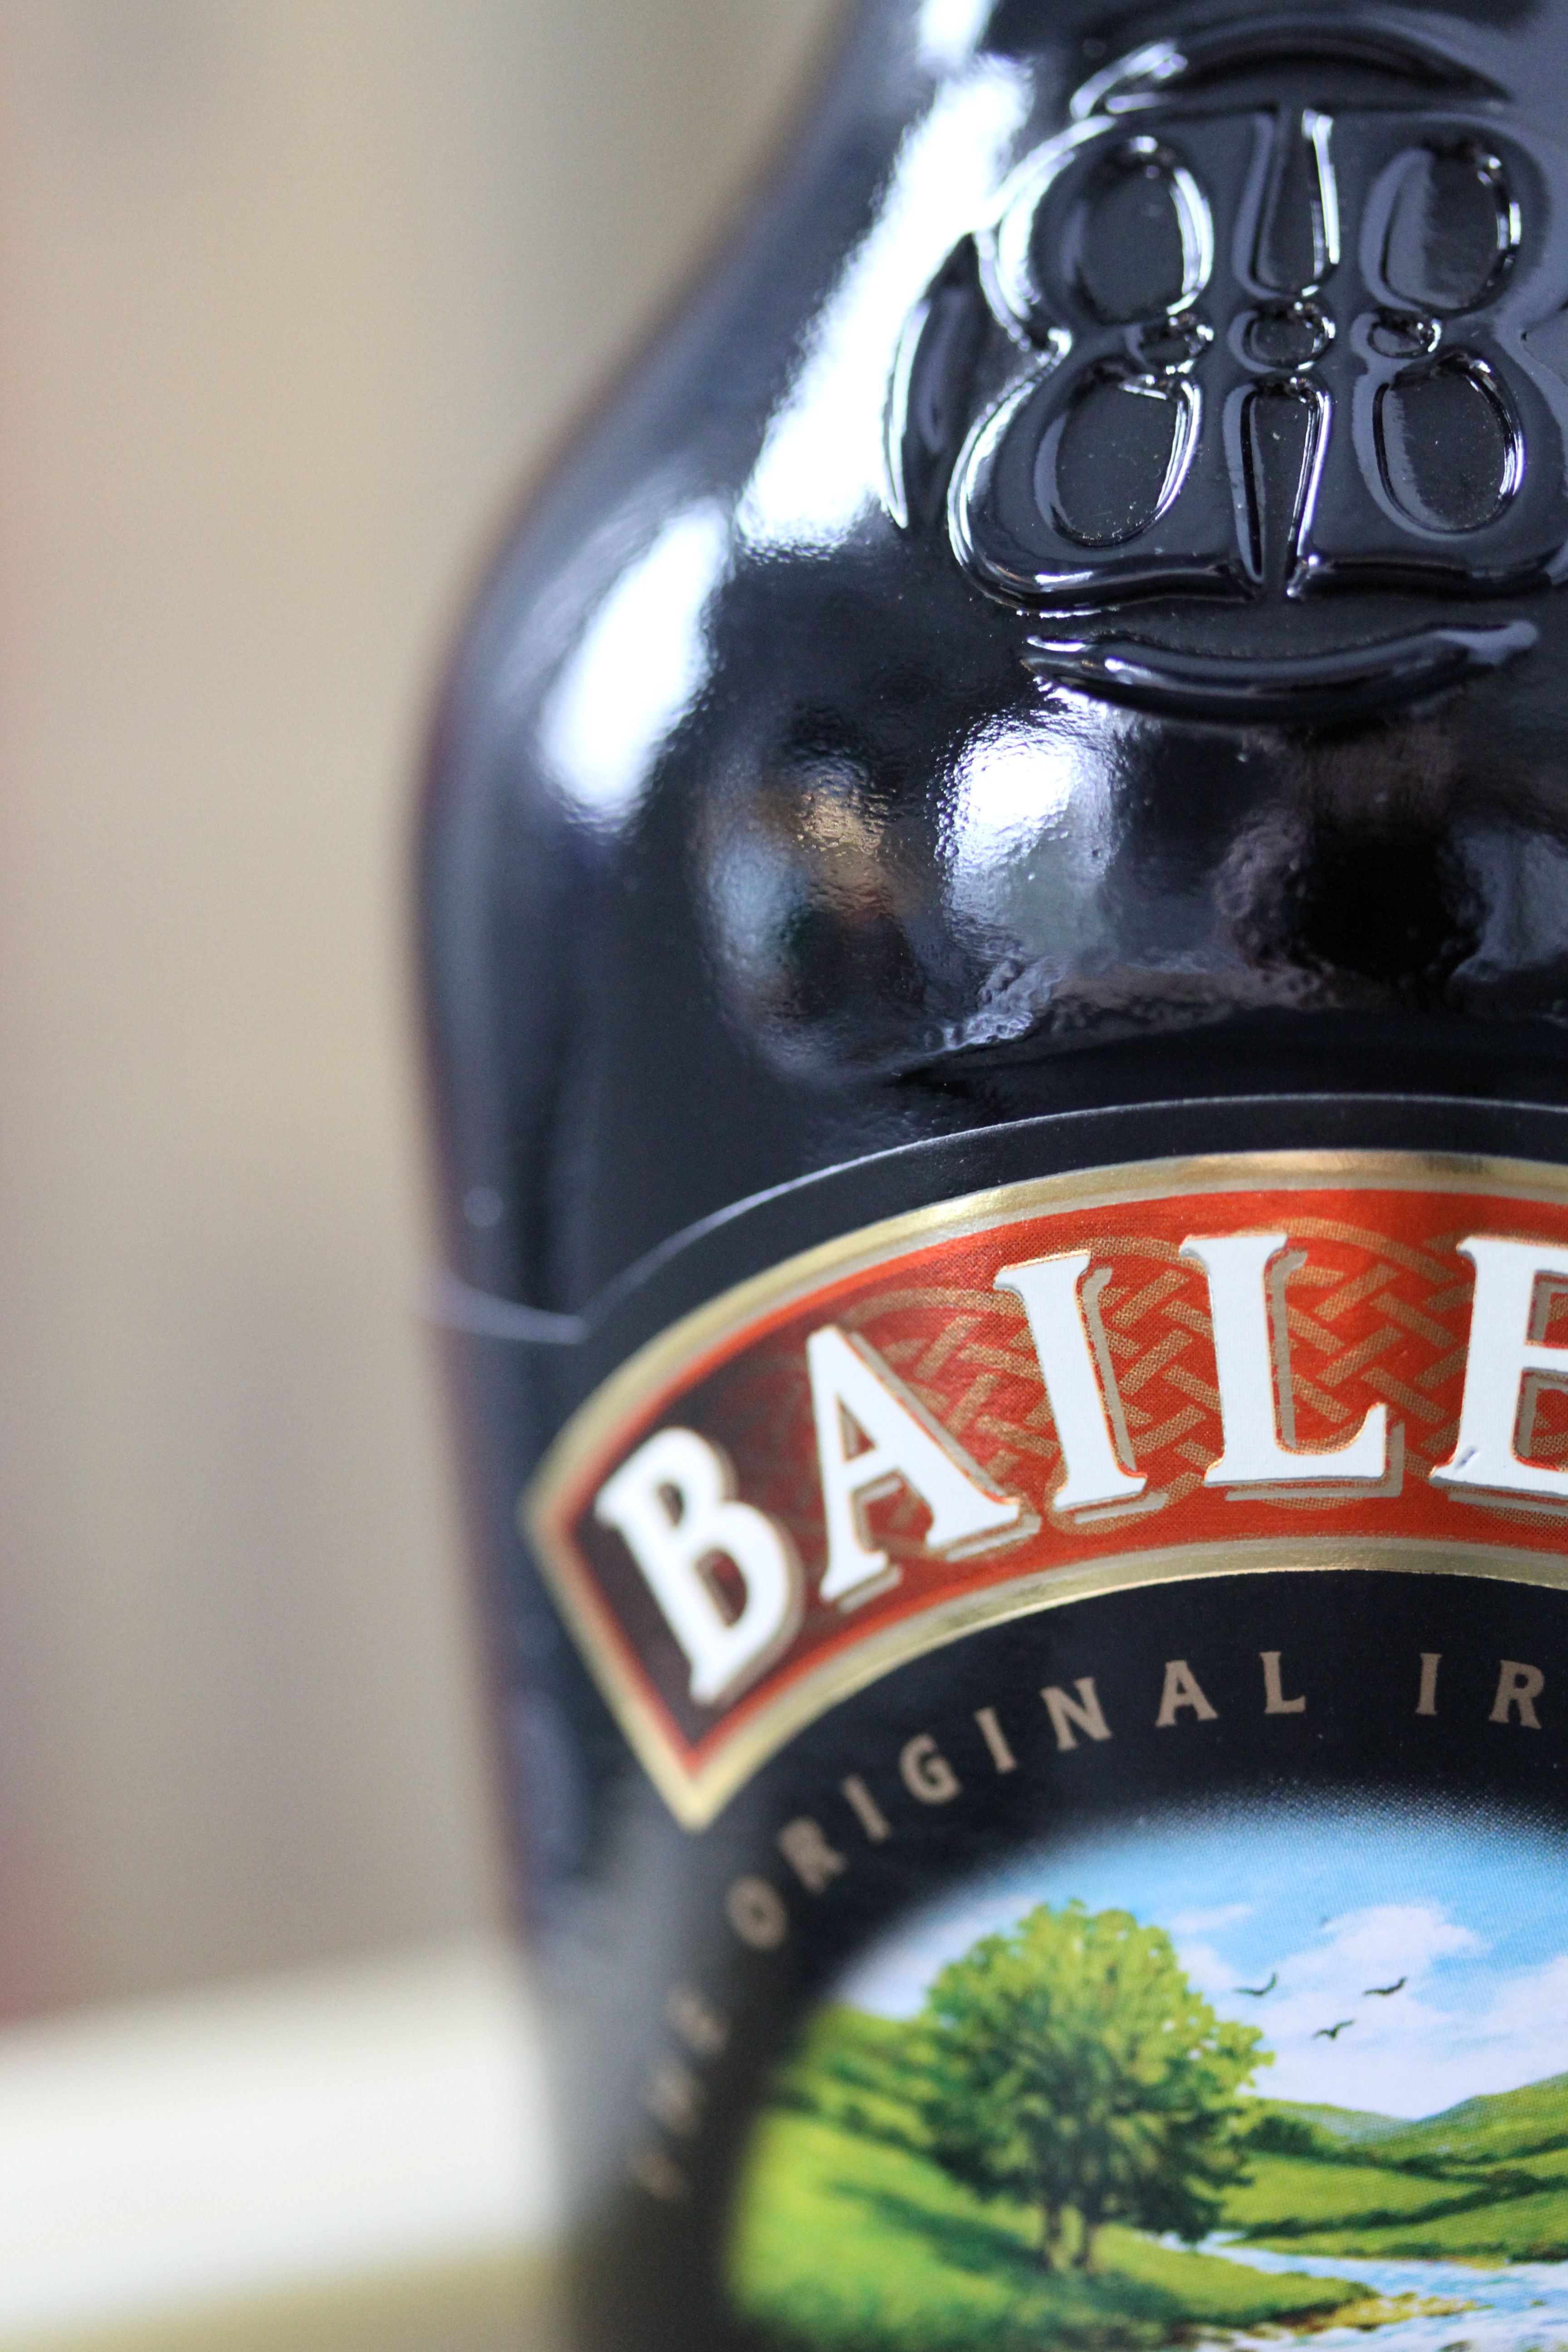 The all-important ingredient: Bailey's.